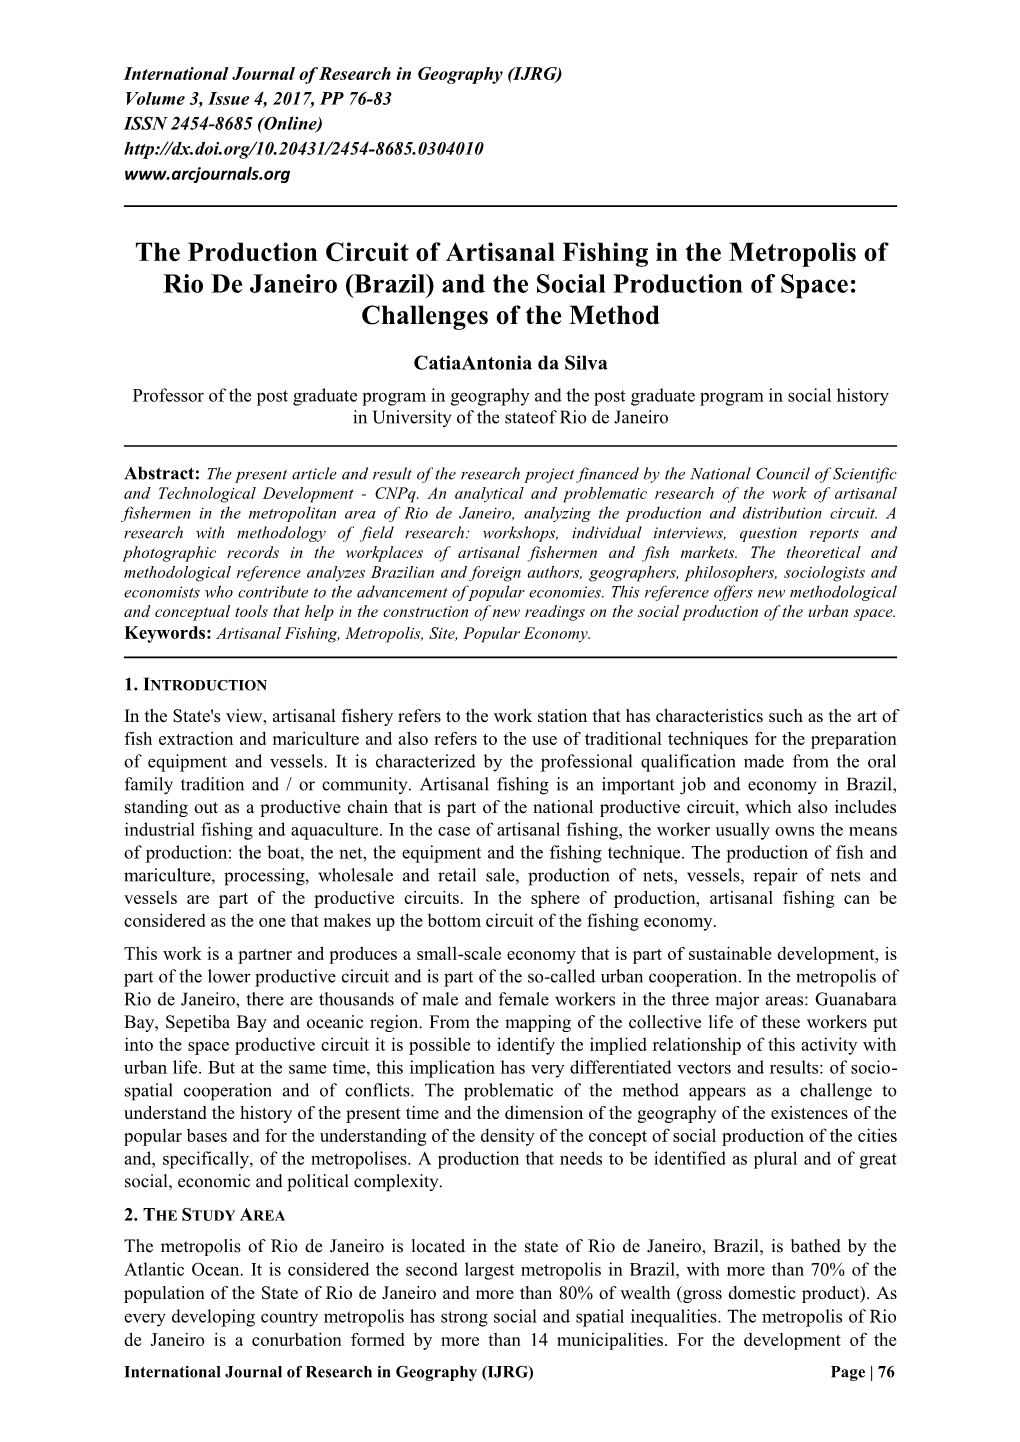 The Production Circuit of Artisanal Fishing in the Metropolis of Rio De Janeiro (Brazil) and the Social Production of Space: Challenges of the Method